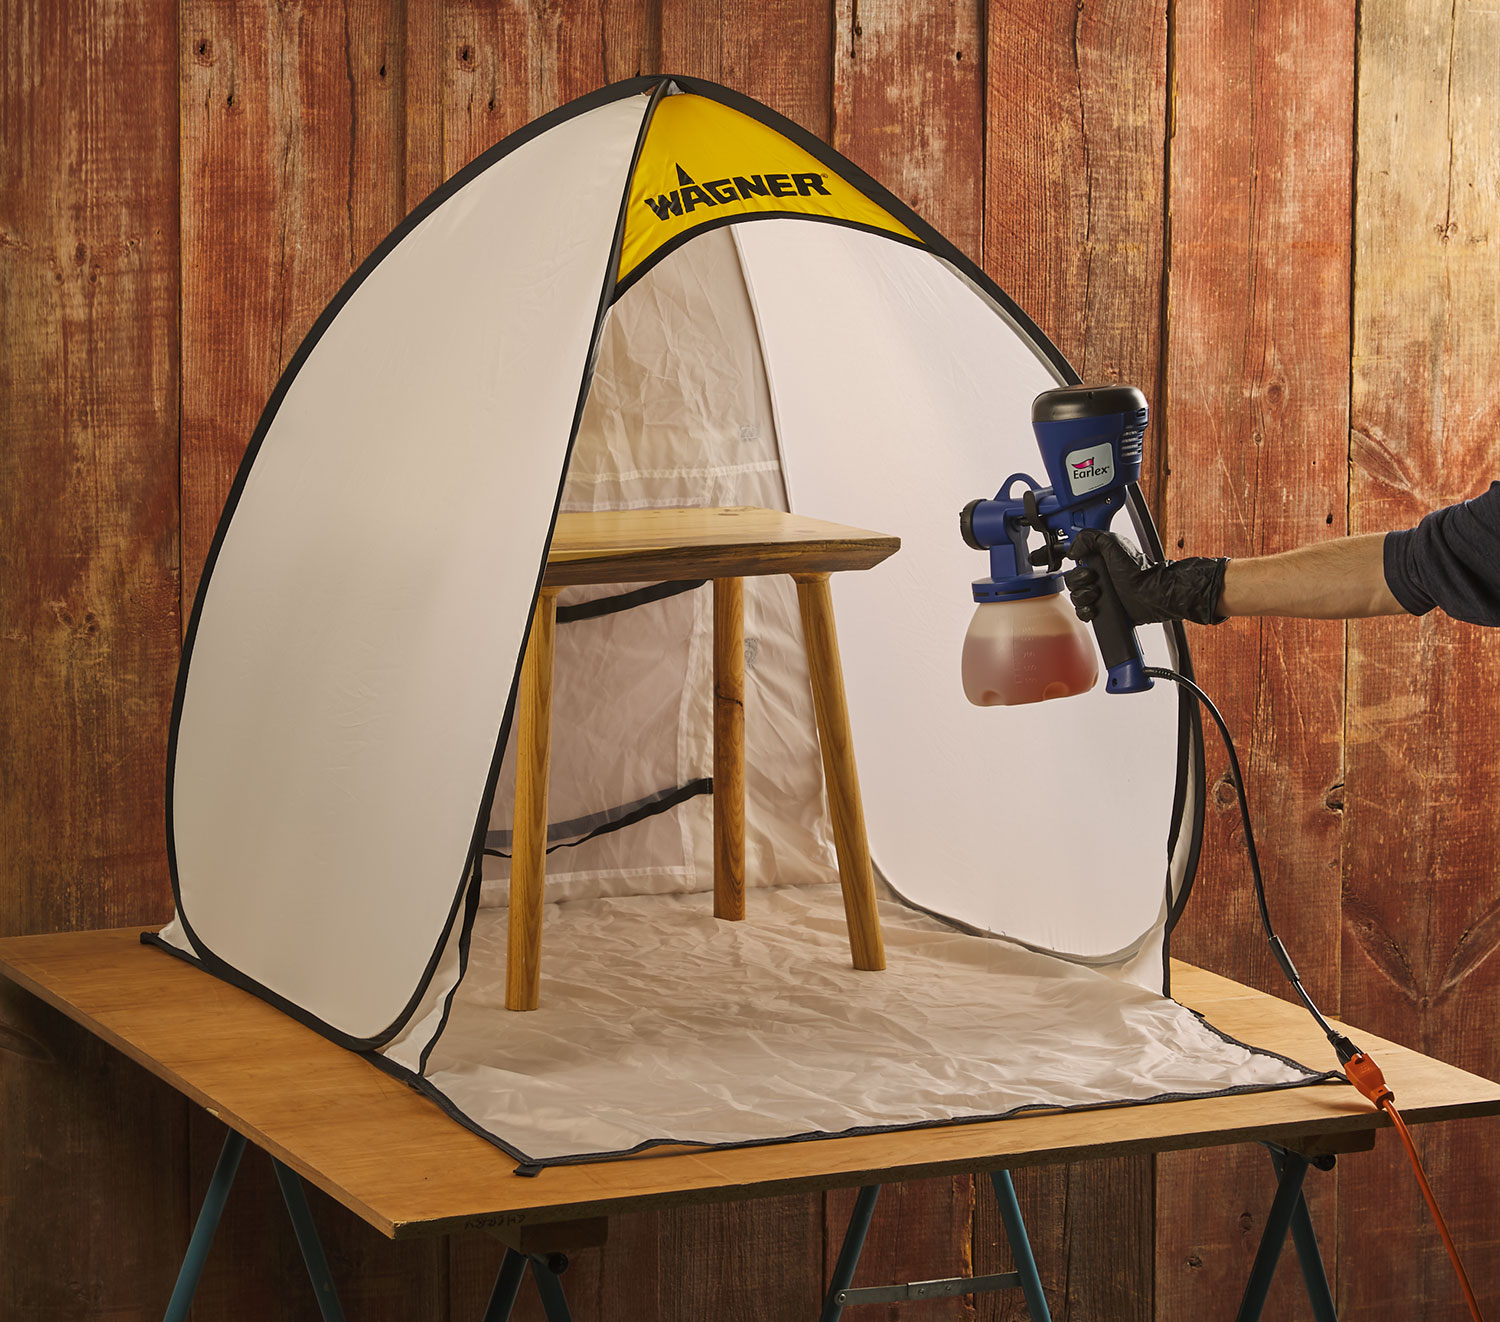 Using a spray shelter indoors.